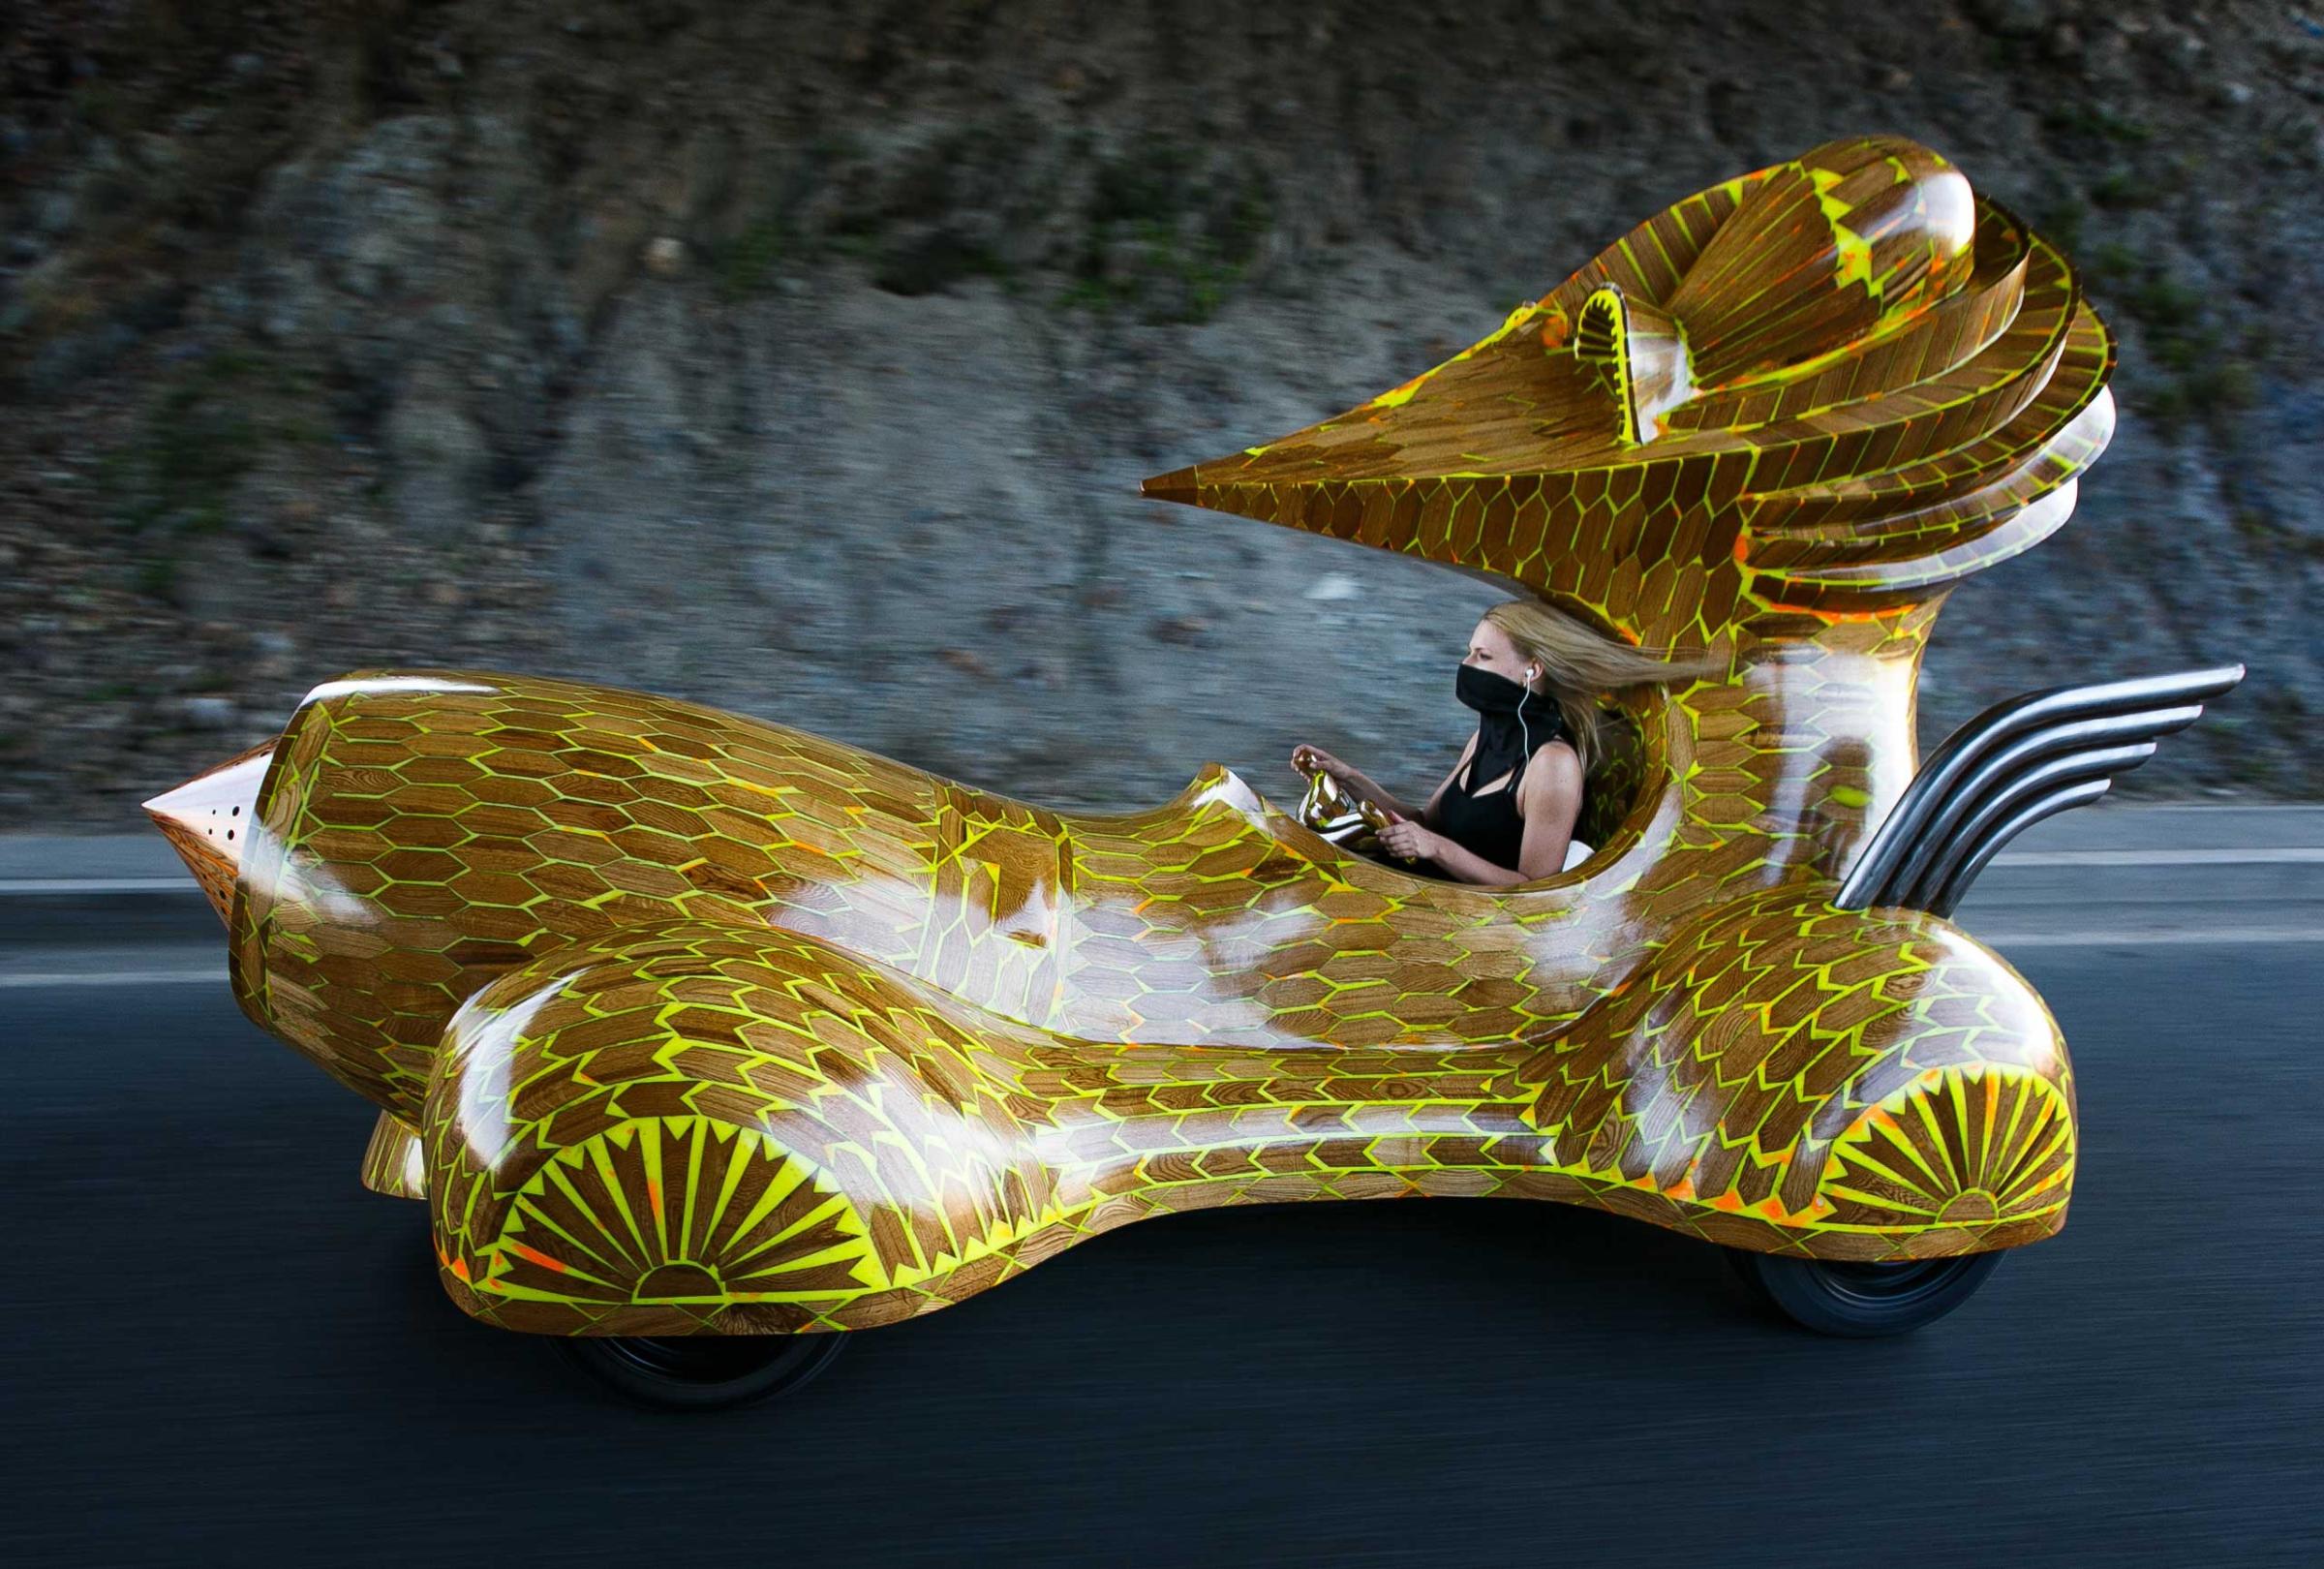 A president-mobil concept car, designed by Georgy Ostretsov, is given a test run across the Zolotoi Rog (Golden Horn) Bay on Oct. 3, 2014. The car's engine is powered by ethanol biofuel.